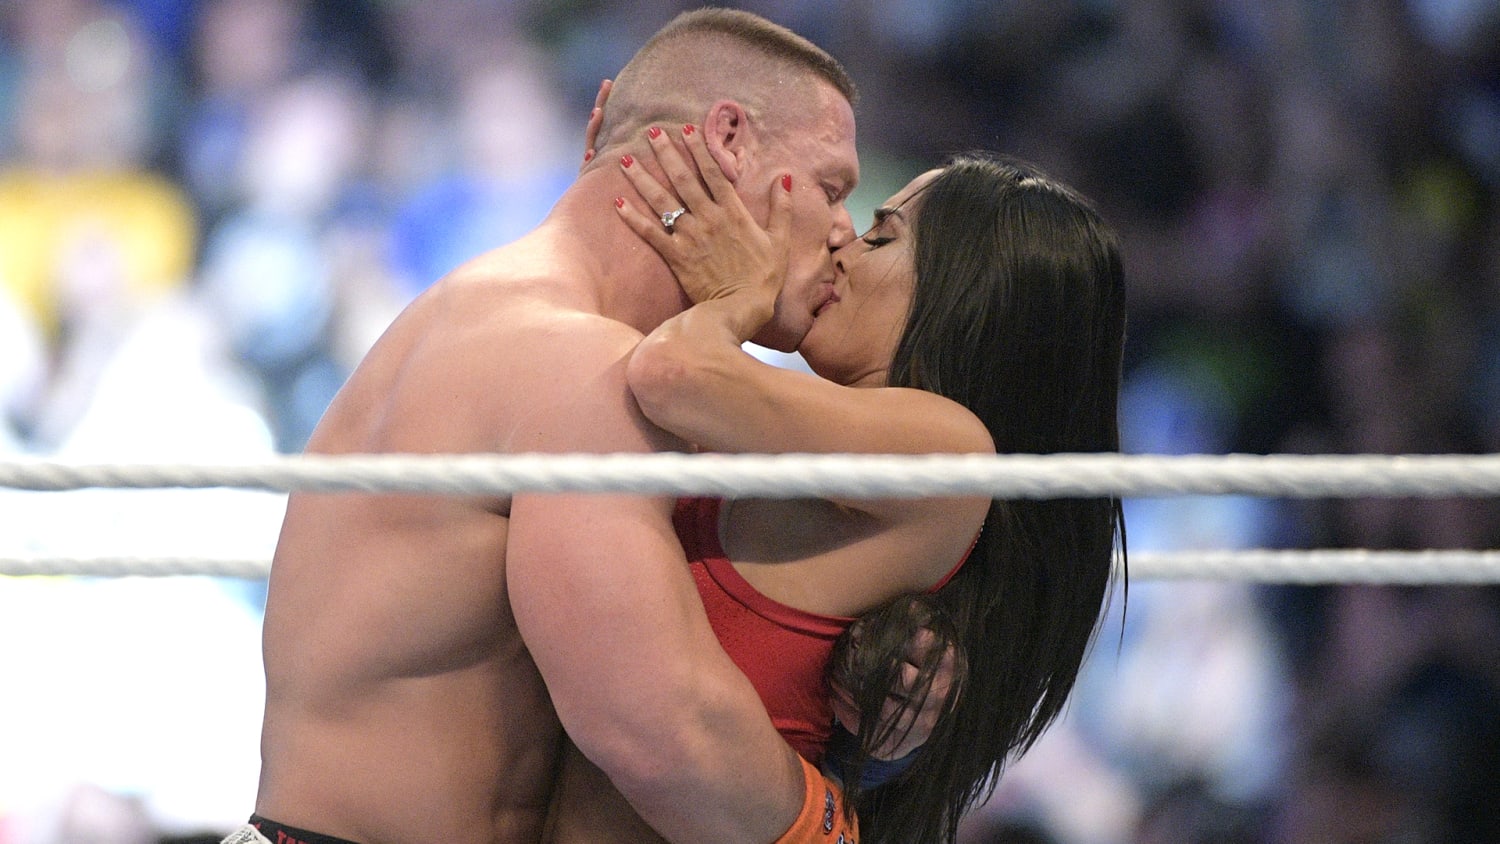 John Cena pops the question to Nikki Bella at WrestleMania 33 — and she said yes ...1920 x 1080